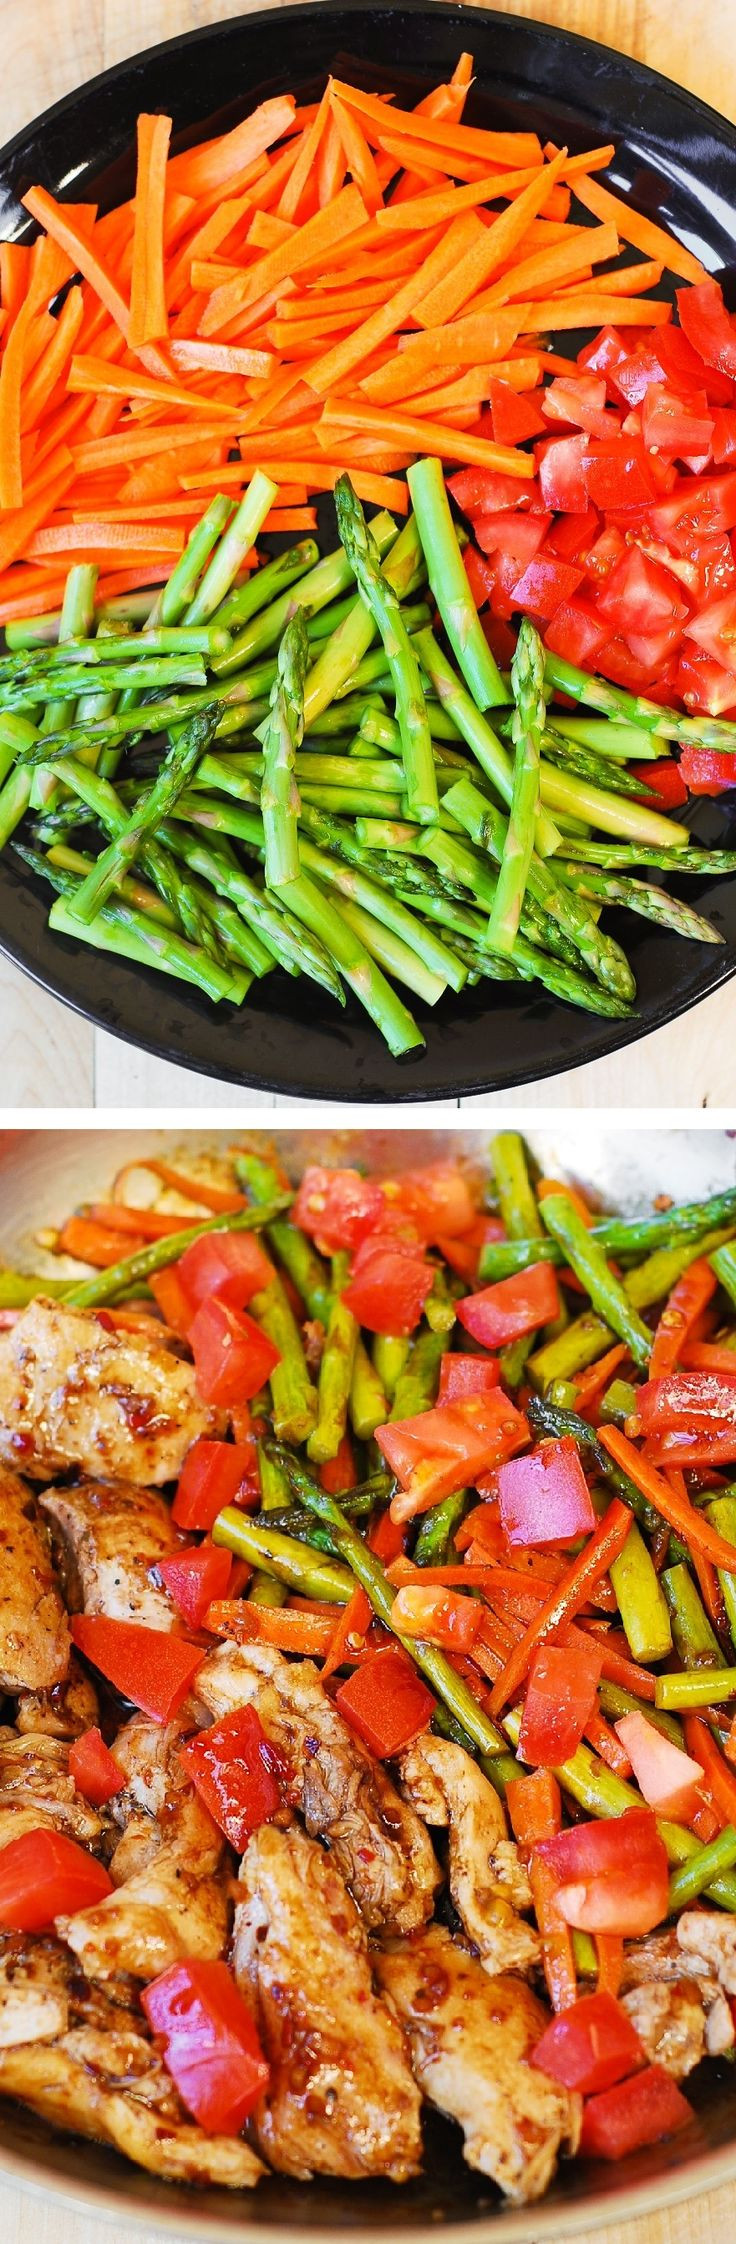 Low Cholesterol Recipes With Chicken
 175 best images about low or no salt recipes on Pinterest